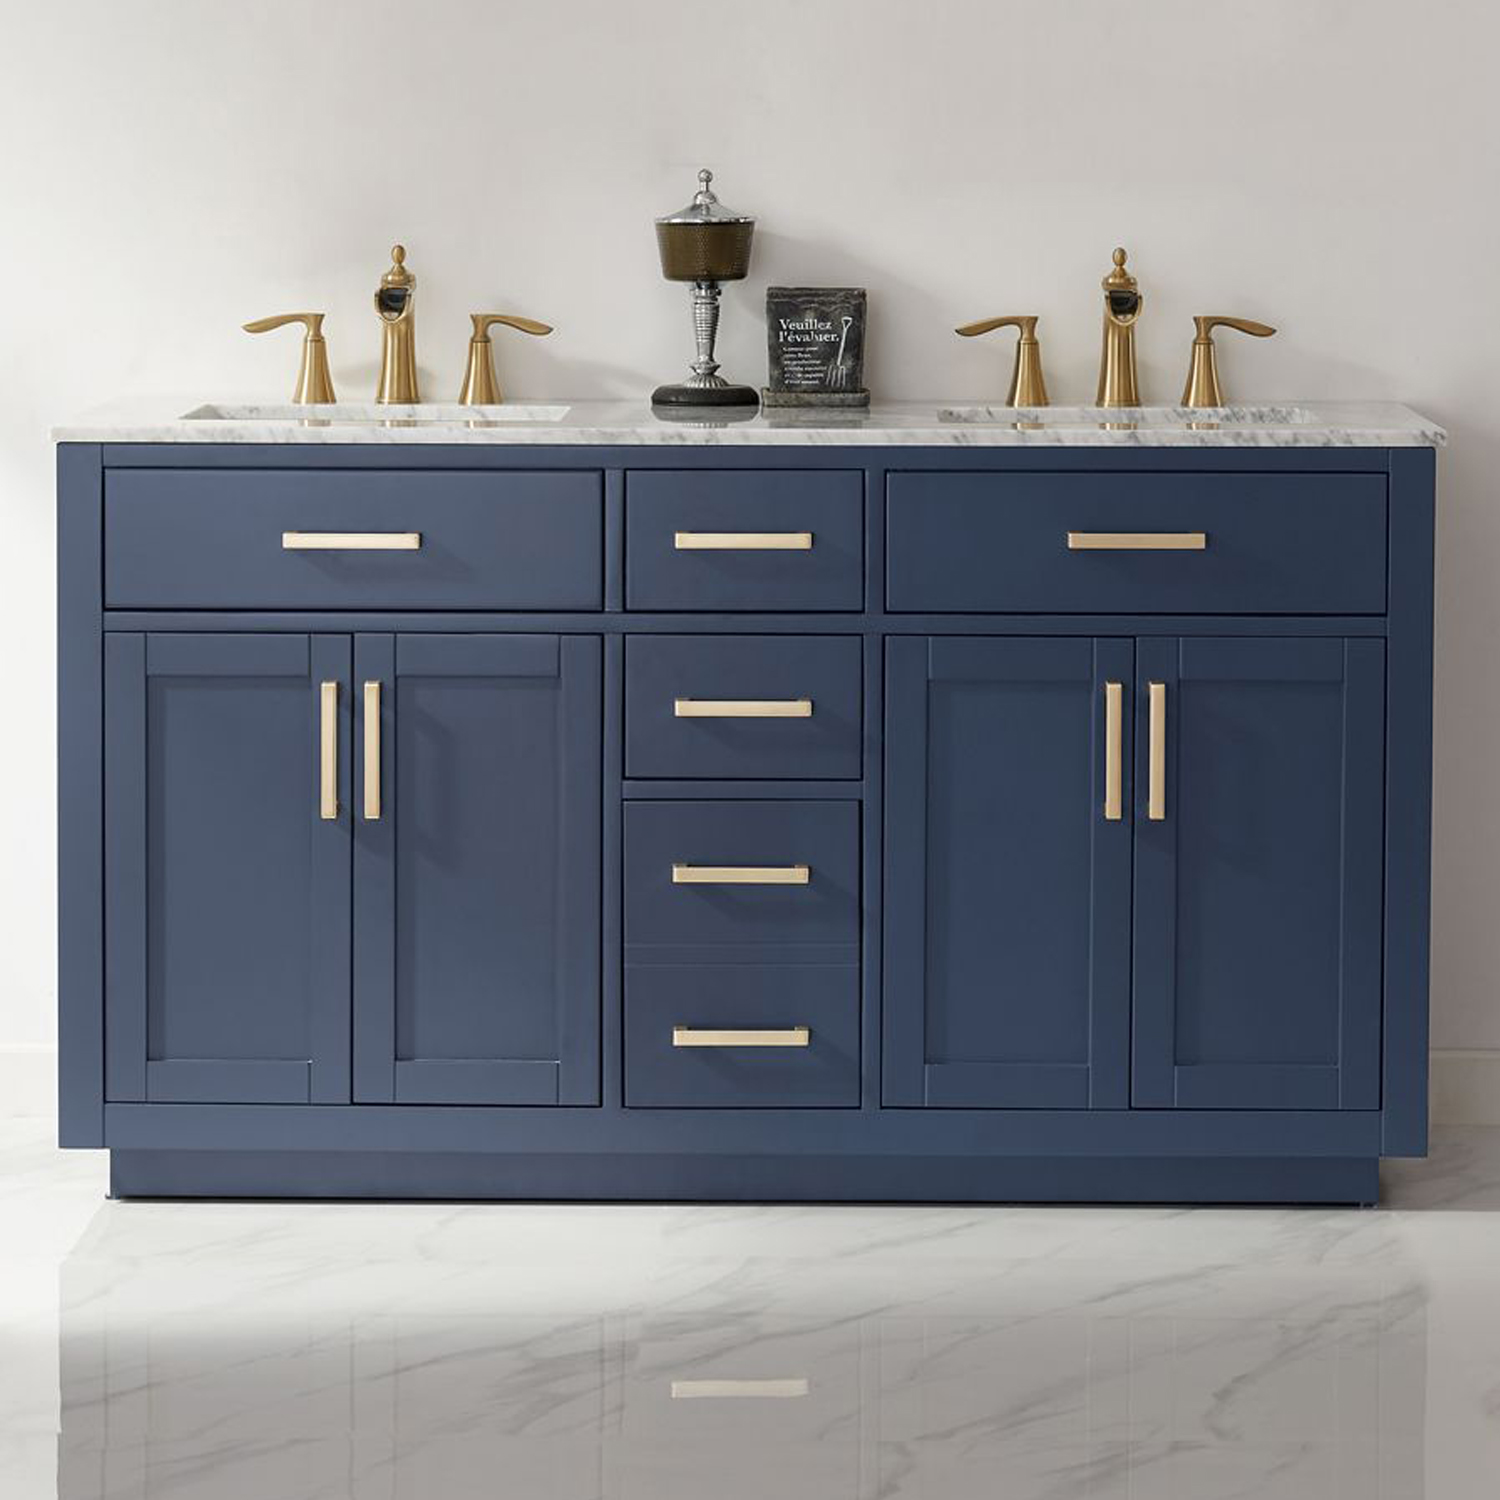 Issac Edwards Collection 60" Double Bathroom Vanity Set in Royal Blue and Carrara White Marble Countertop without Mirror